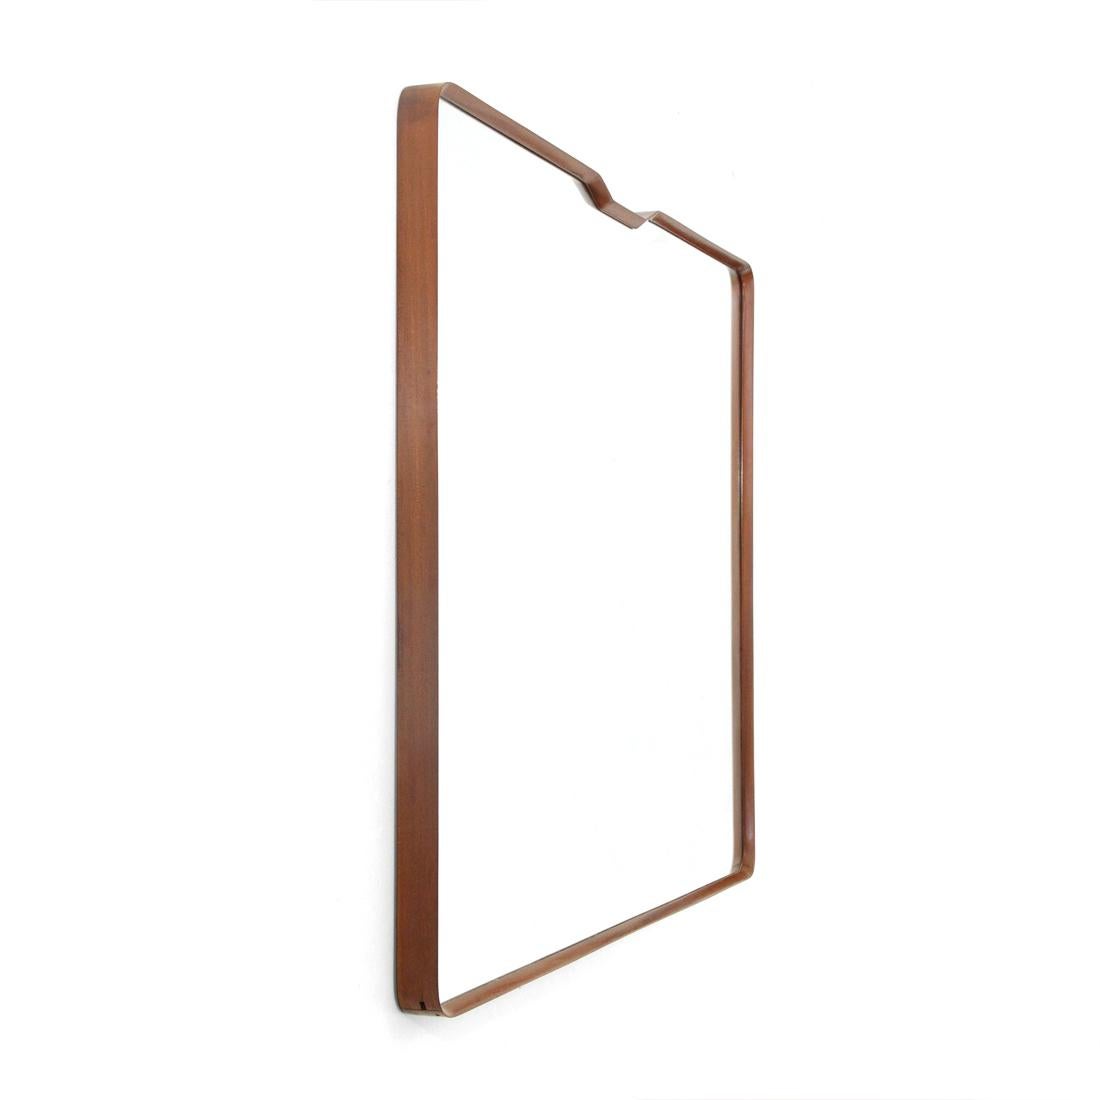 Italian manufacture mirror produced in the 1950s.
Solid wood frame with rounded corners.
Mirrored surface.
Good general conditions, some signs due to normal use over time.

Dimensions: Length 148 cm, depth 6 cm, height 121 cm.